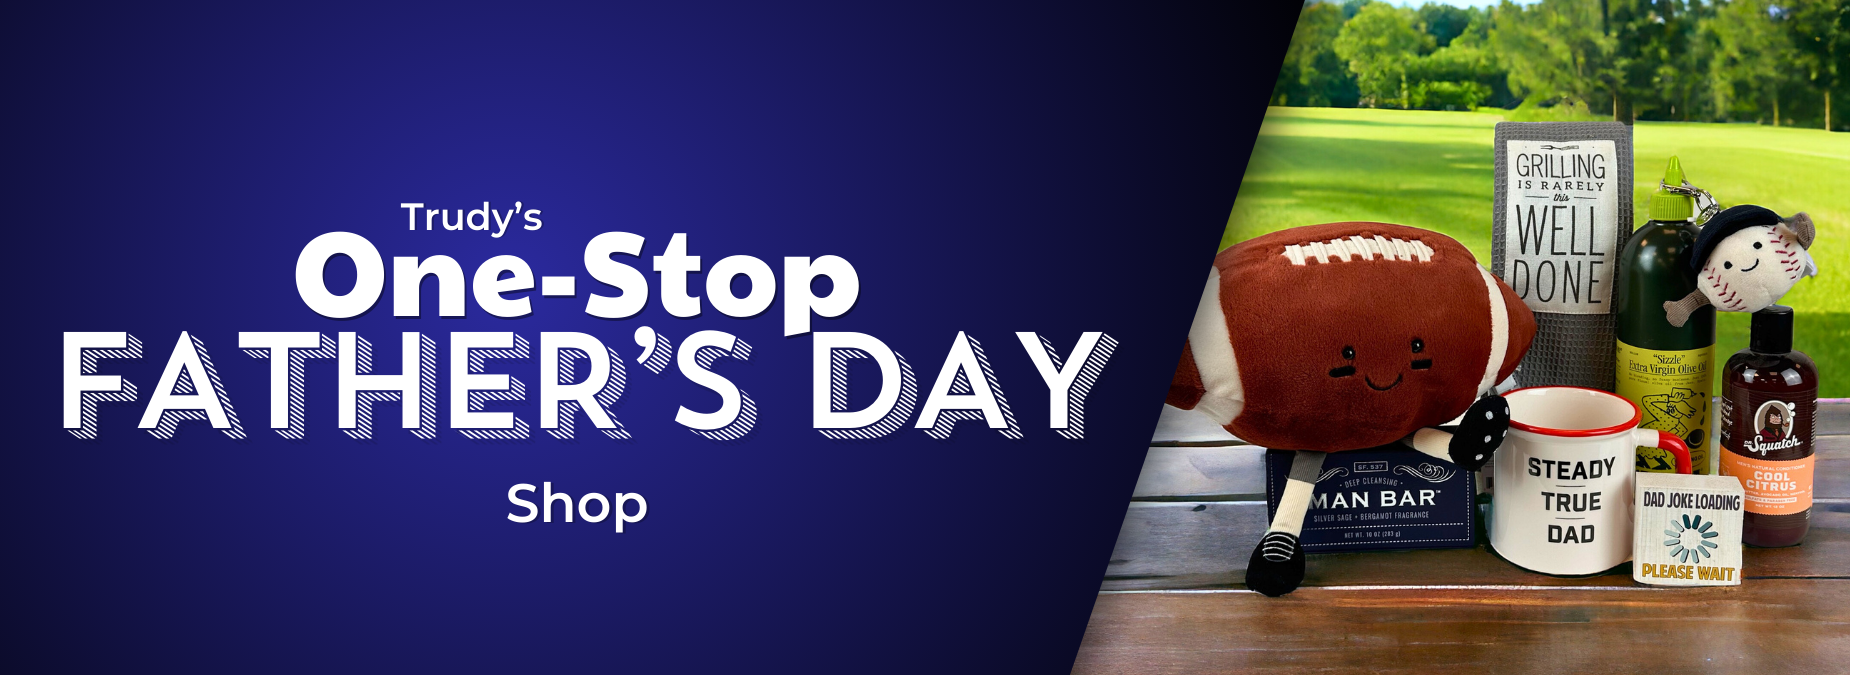 Trudy's One-Stop Father's Day Shop